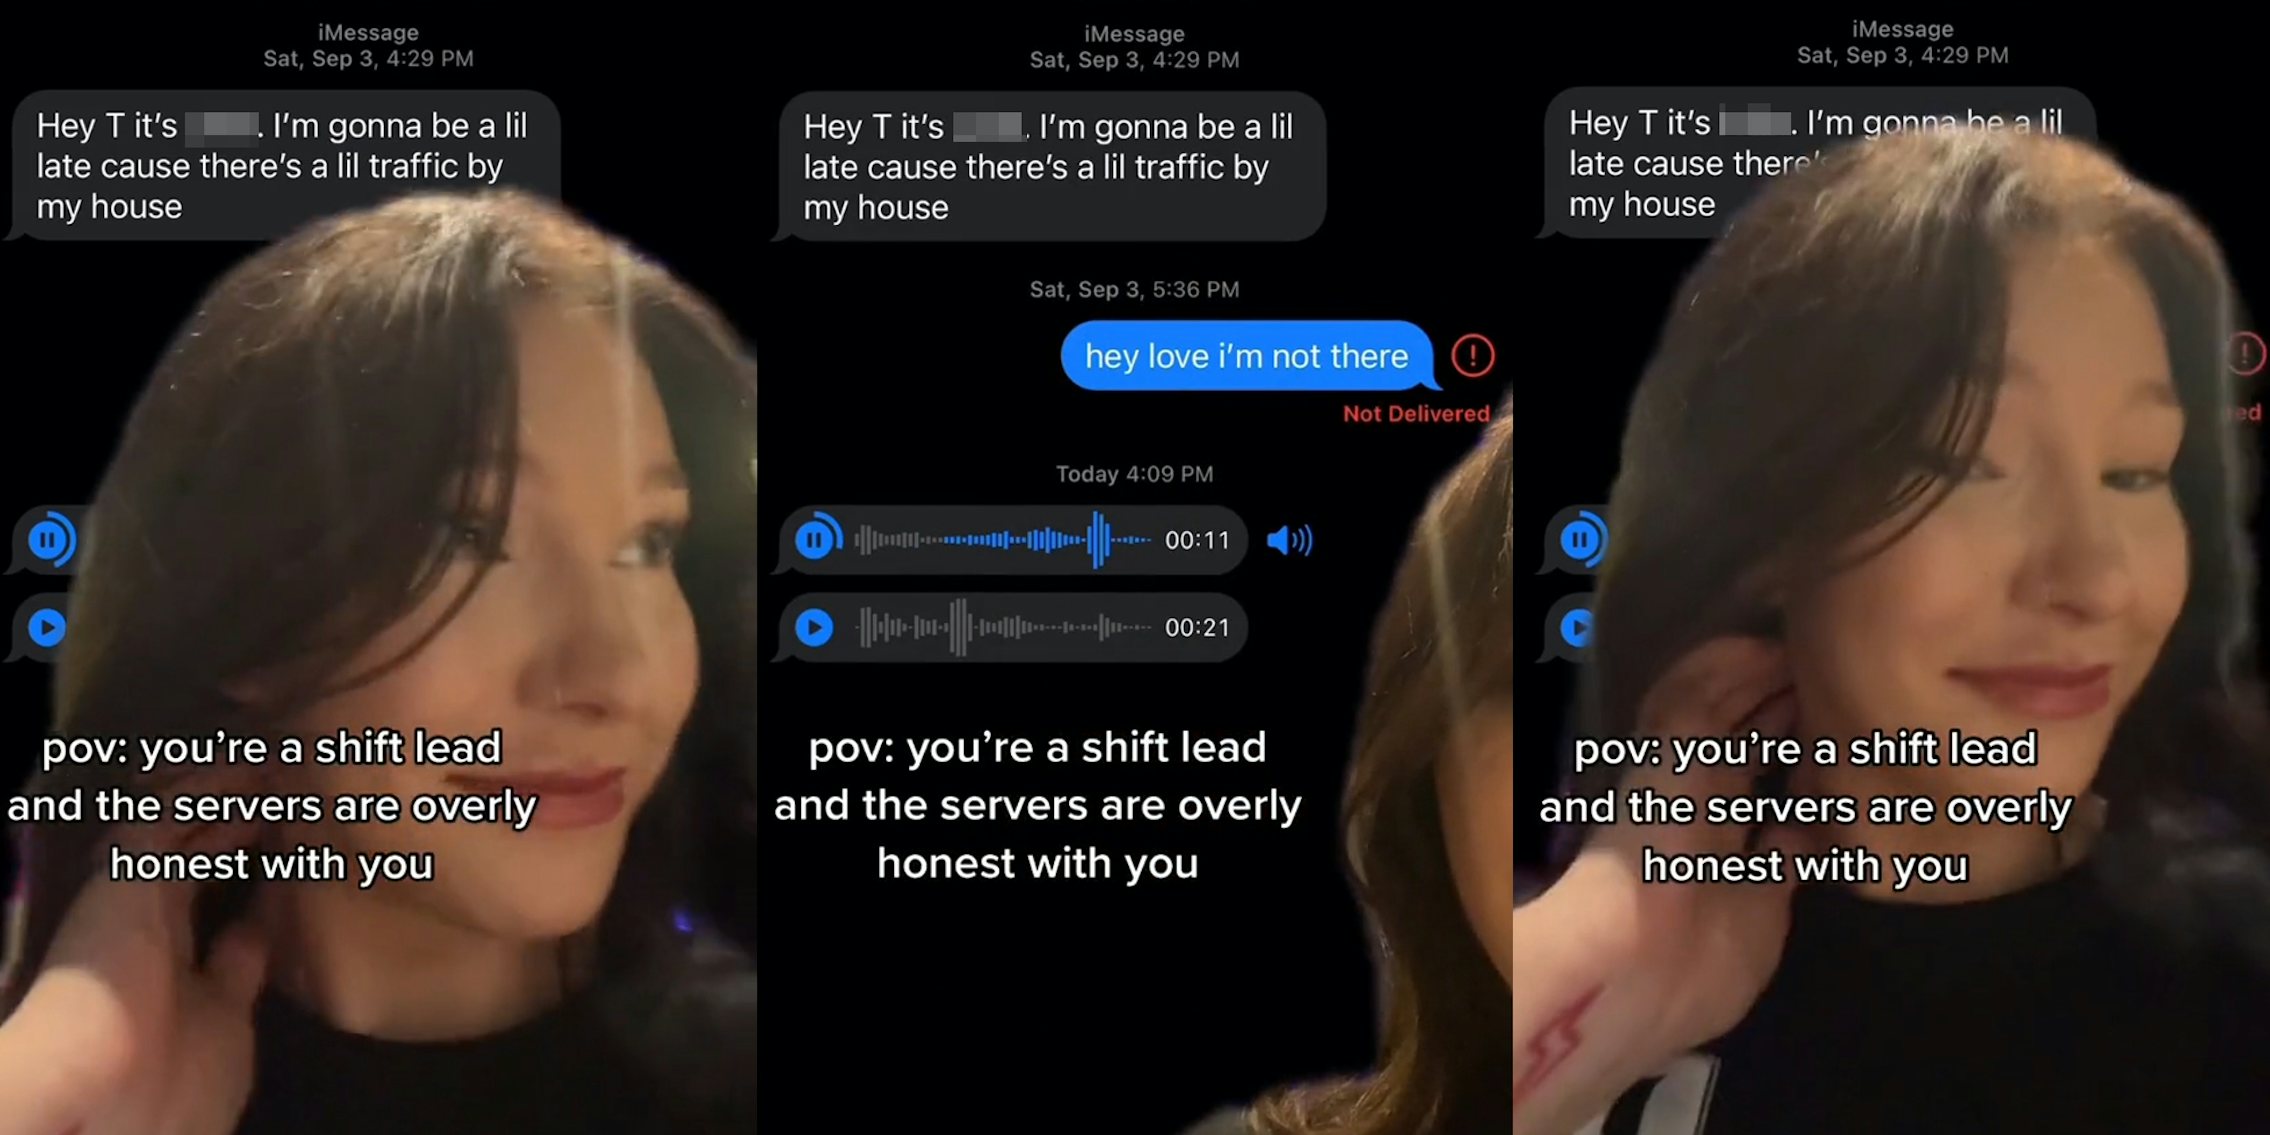 woman greenscreen TikTok over text messages 'Hey T its blank. I'm gonna be a lil late there's a little traffic by my house' caption 'pov: you're a shift lead and the servers are overly honest with you' (l) woman greenscreen TikTok over text messages 'Hey T its blank. I'm gonna be a lil late there's a little traffic by my house' 'hey love i'm not there' with audio messages playing caption 'pov: you're a shift lead and the servers are overly honest with you' (c) woman greenscreen TikTok over text messages 'Hey T its blank. I'm gonna be a lil late there's a little traffic by my house' caption 'pov: you're a shift lead and the servers are overly honest with you' (r)